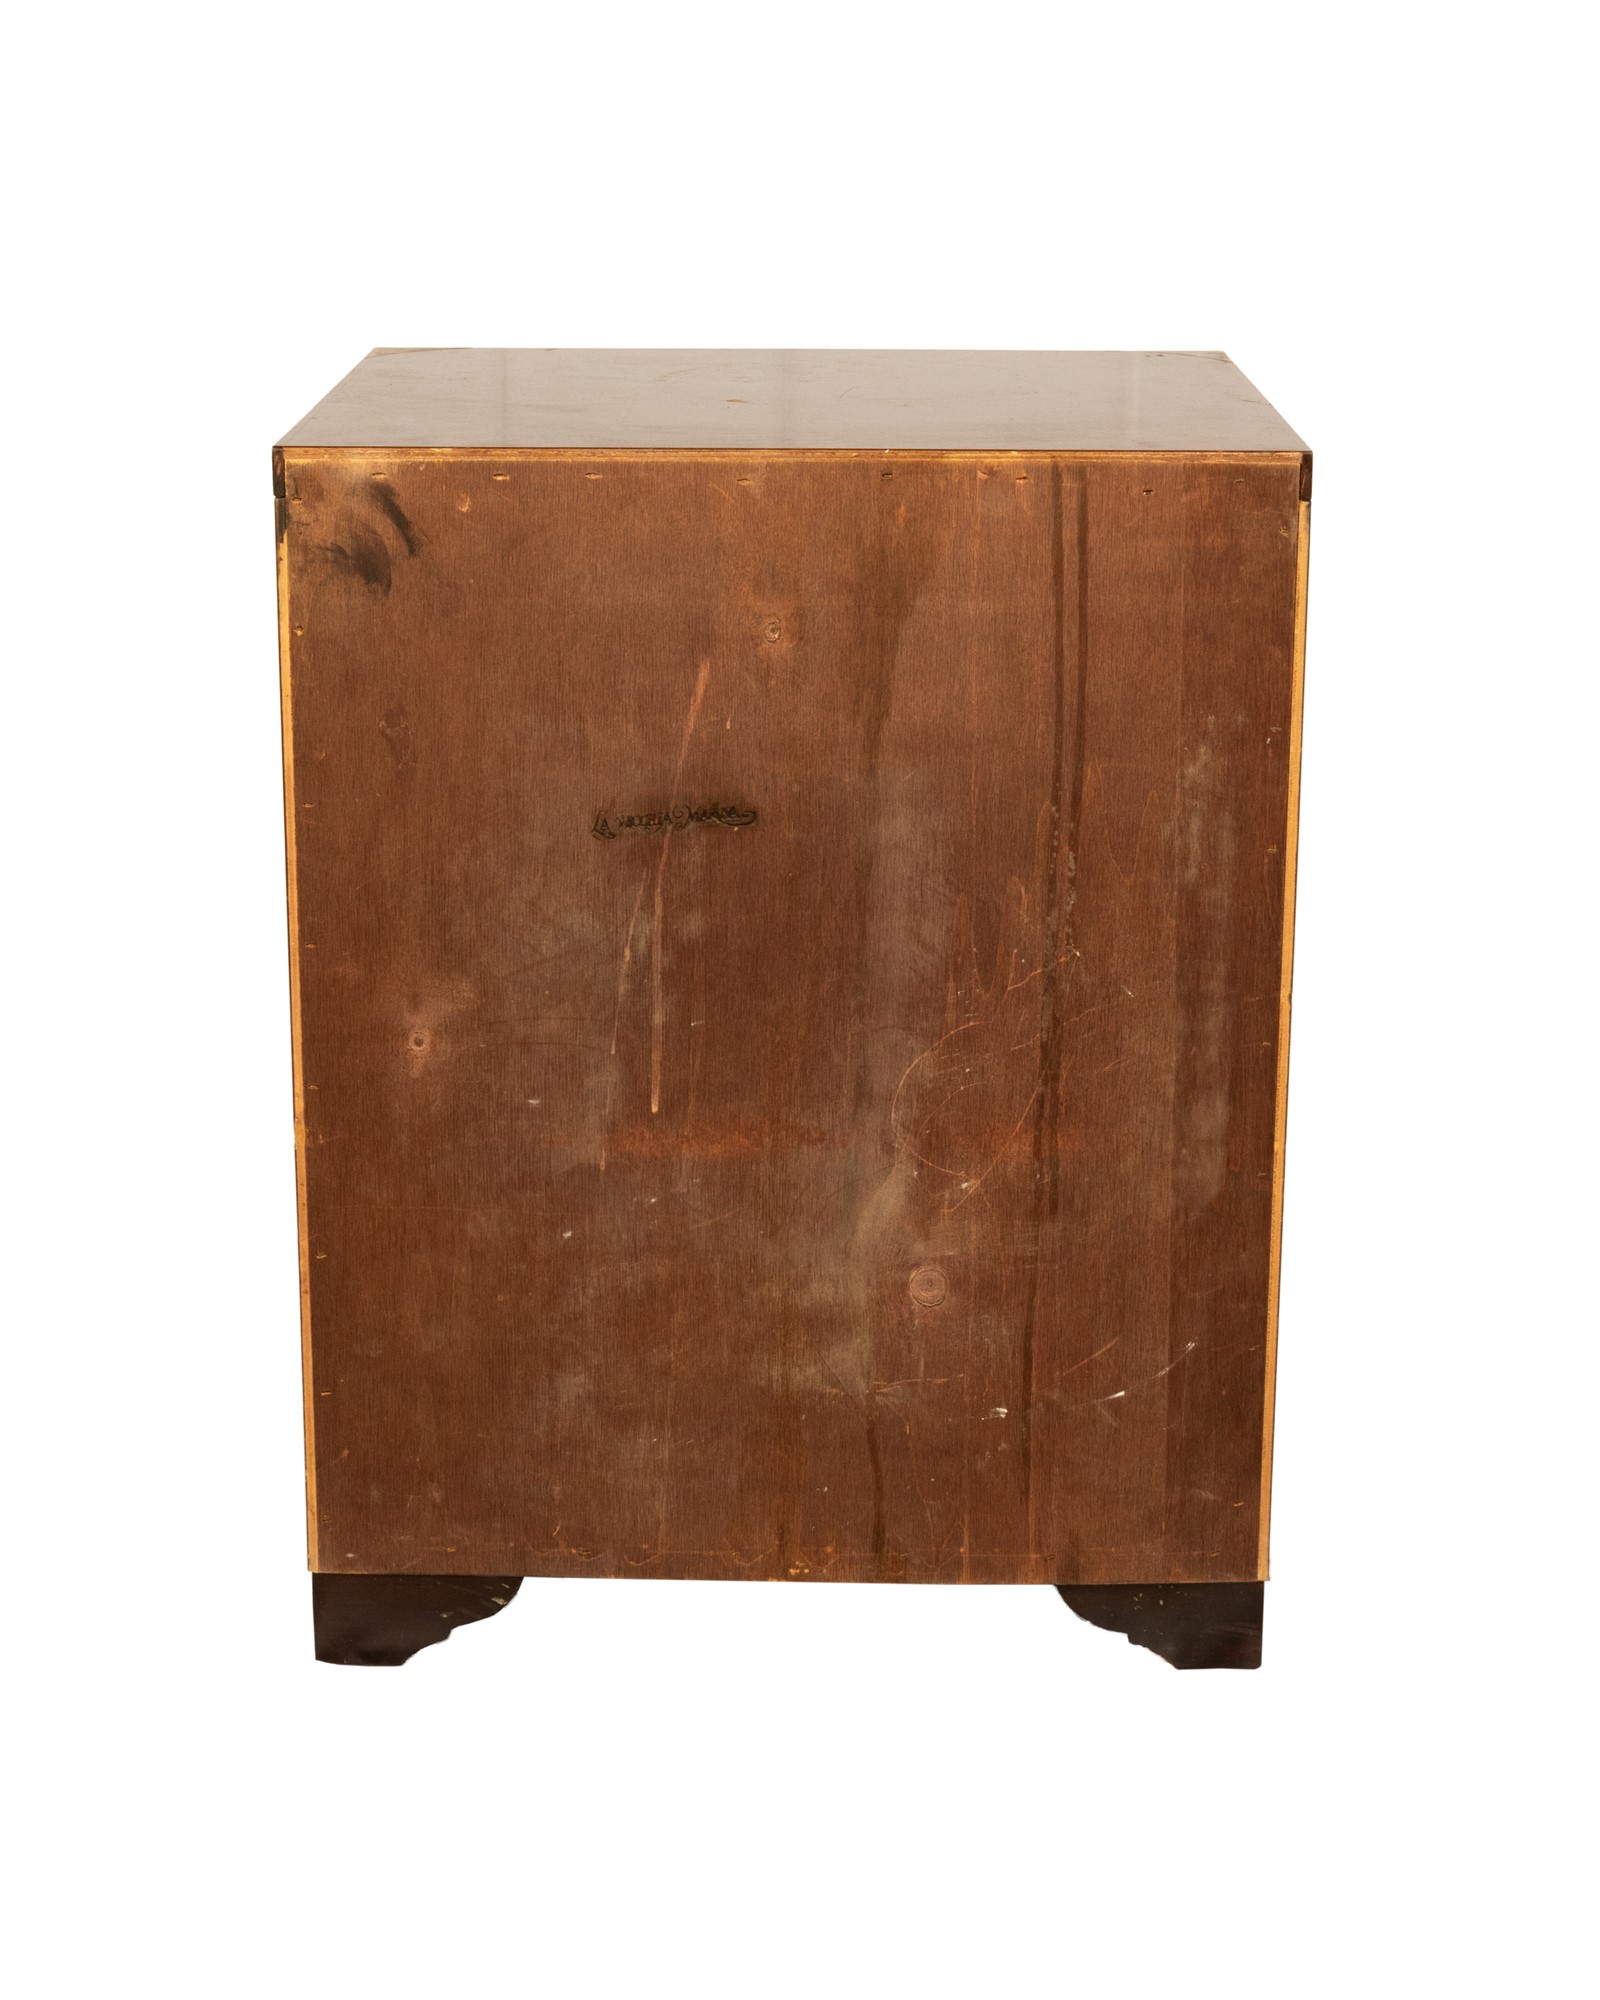 Antica Marina wooden bedside table with brass inserts - Image 20 of 23